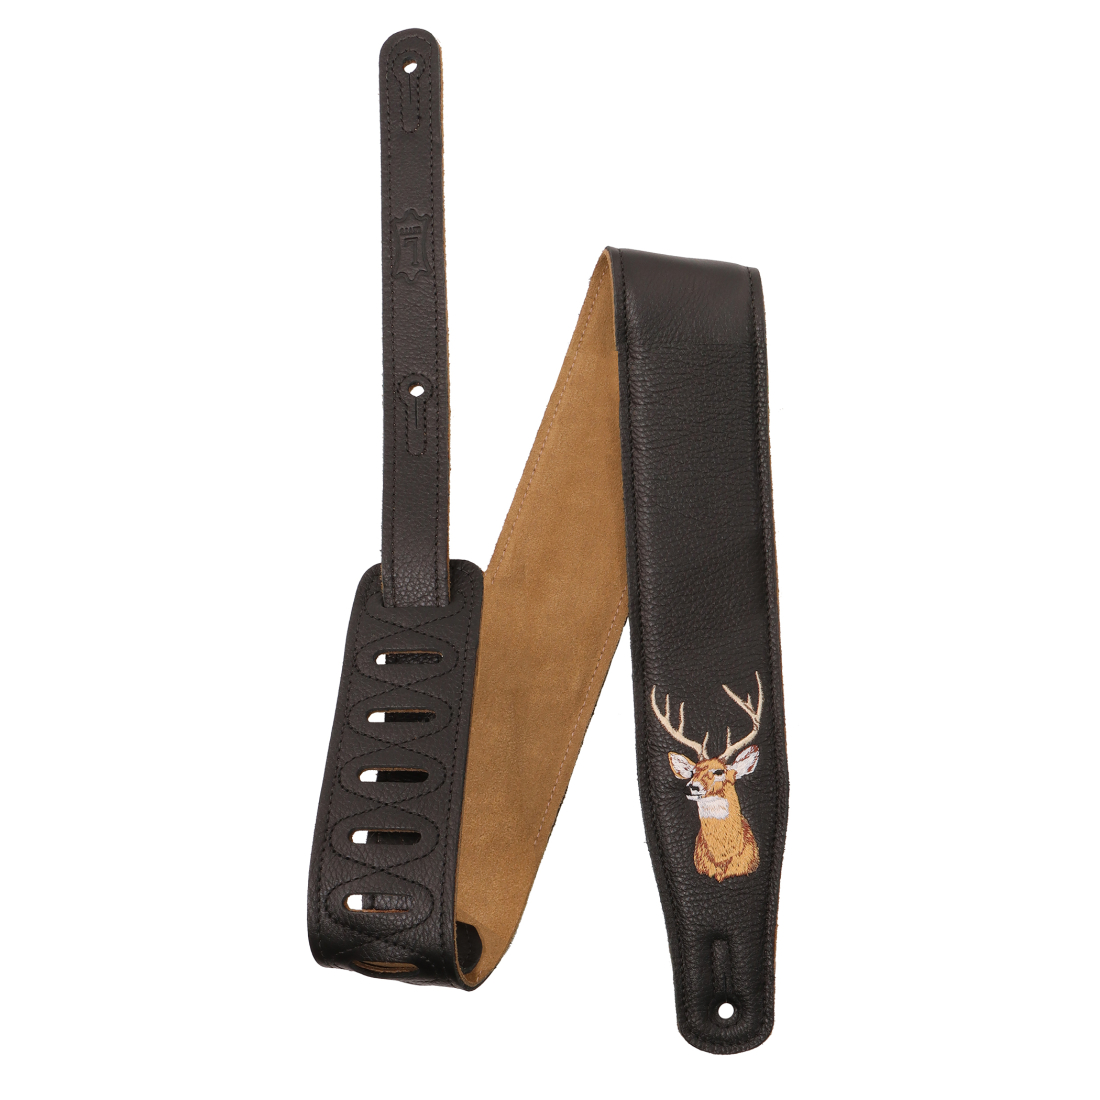 2.5\'\' Leather Guitar Strap with Suede Backing - Deer